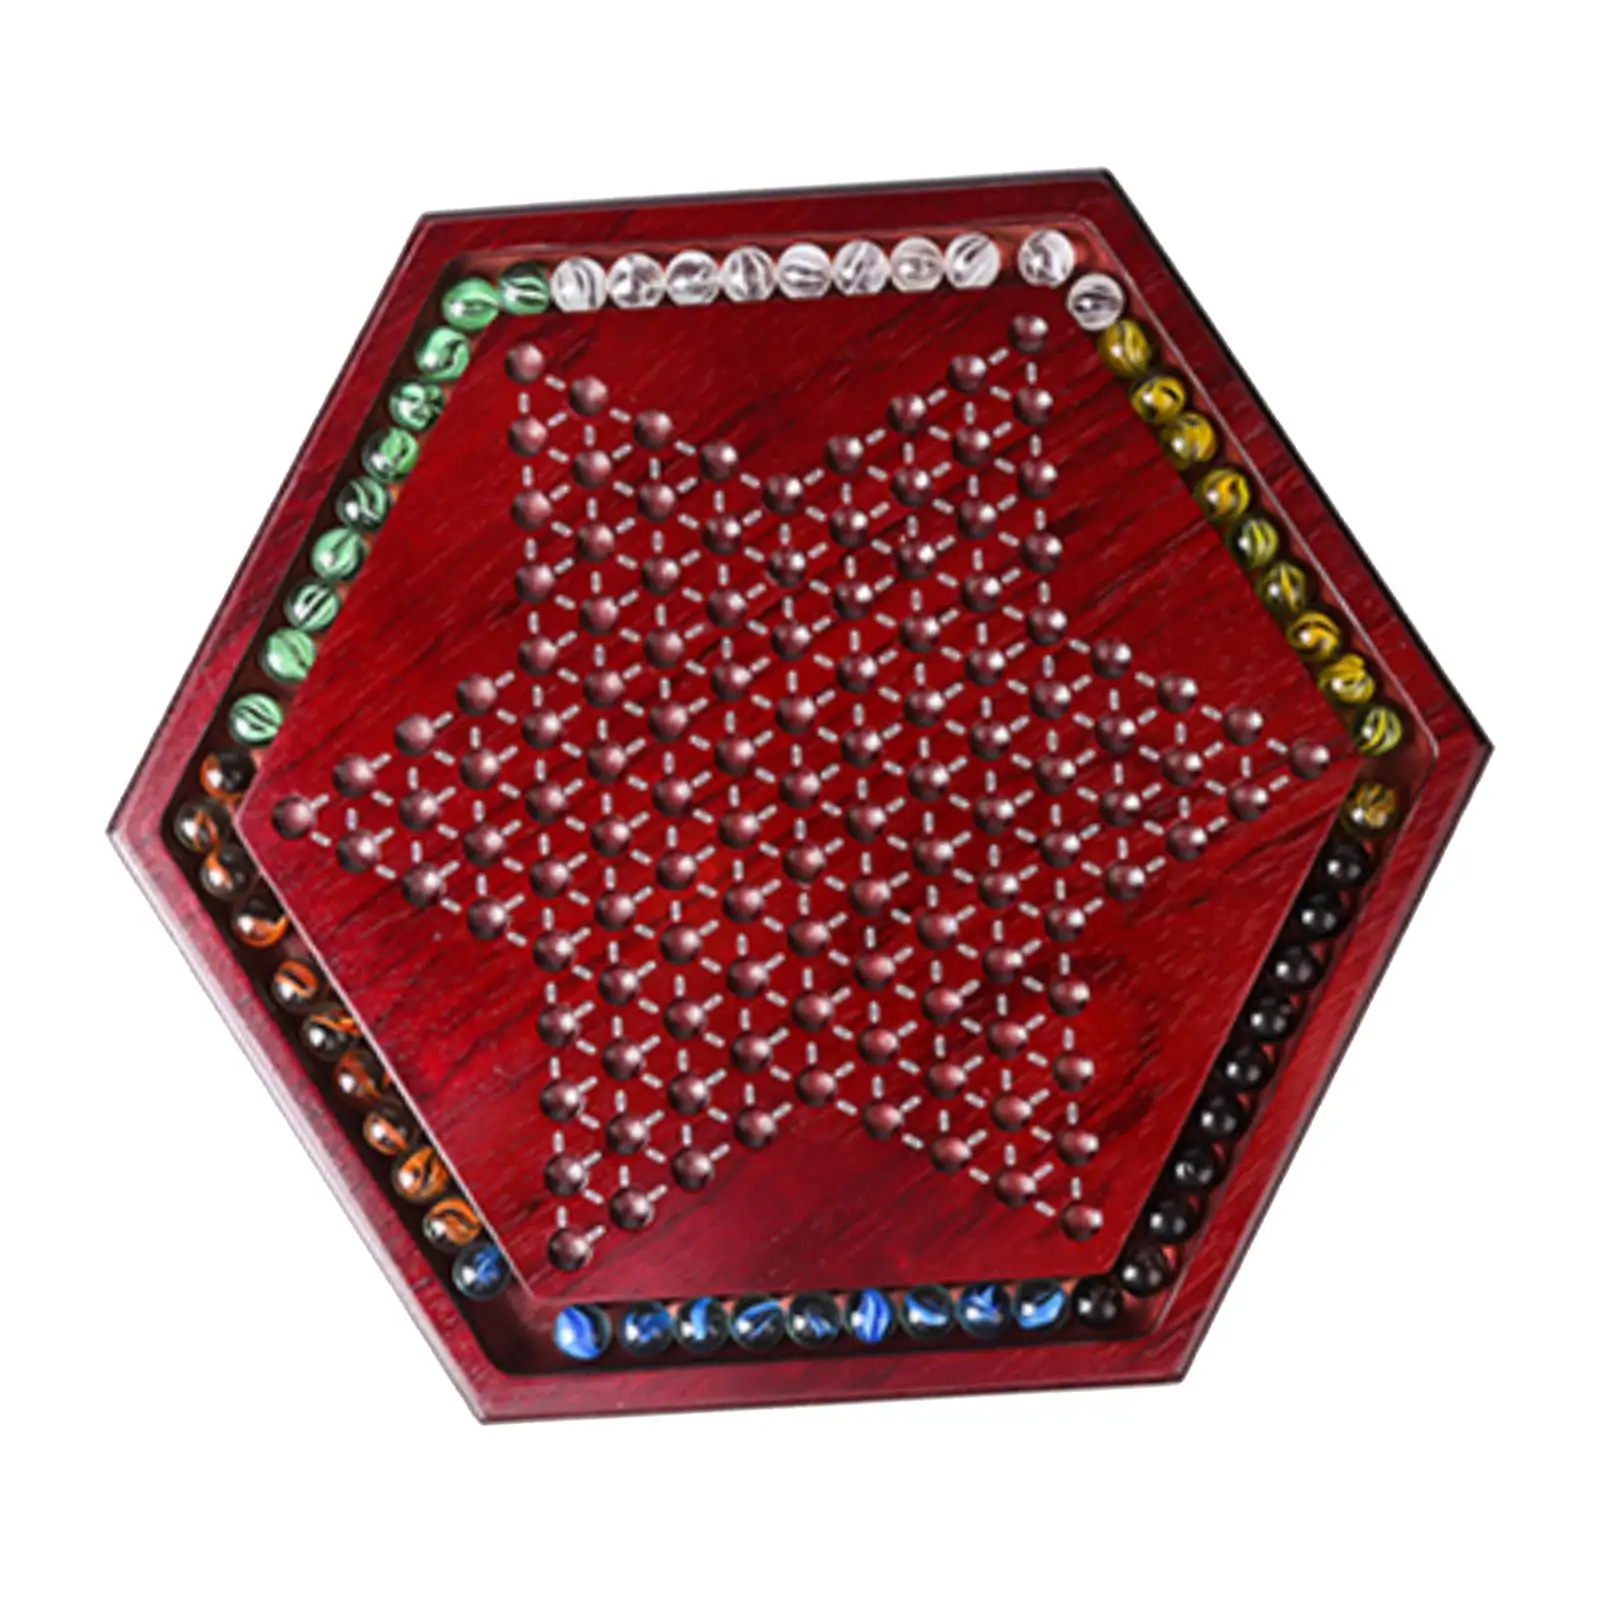 Chinese Checkers Fun Toy Set Card Slot Storage Kids Gifts for 6+ Years Old